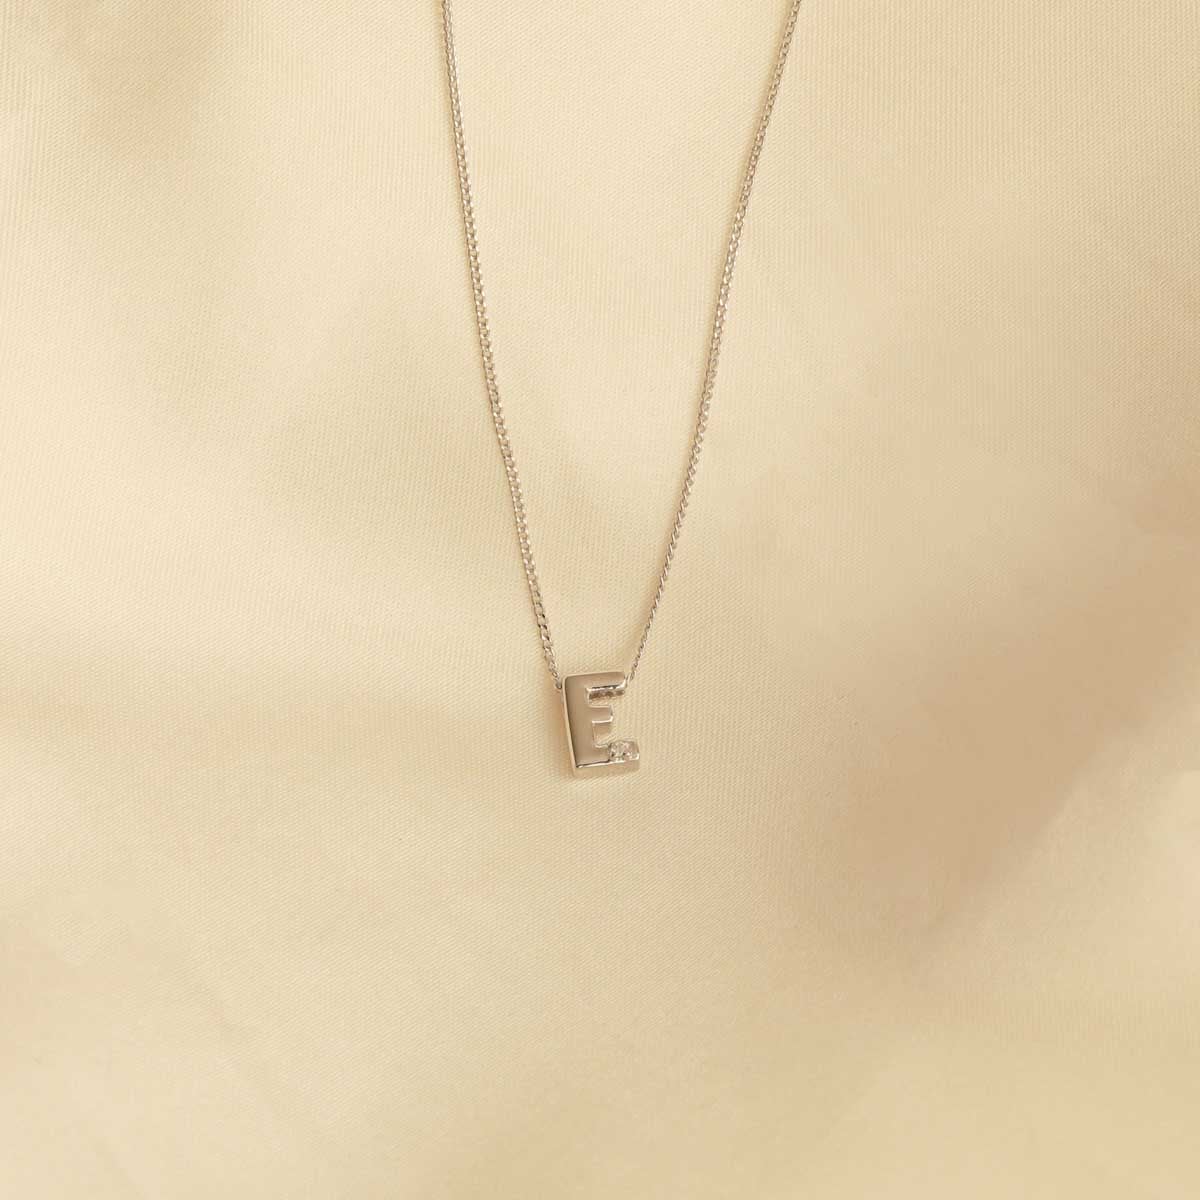 Flat lay shot of E Initial Pendant Necklace in Silver